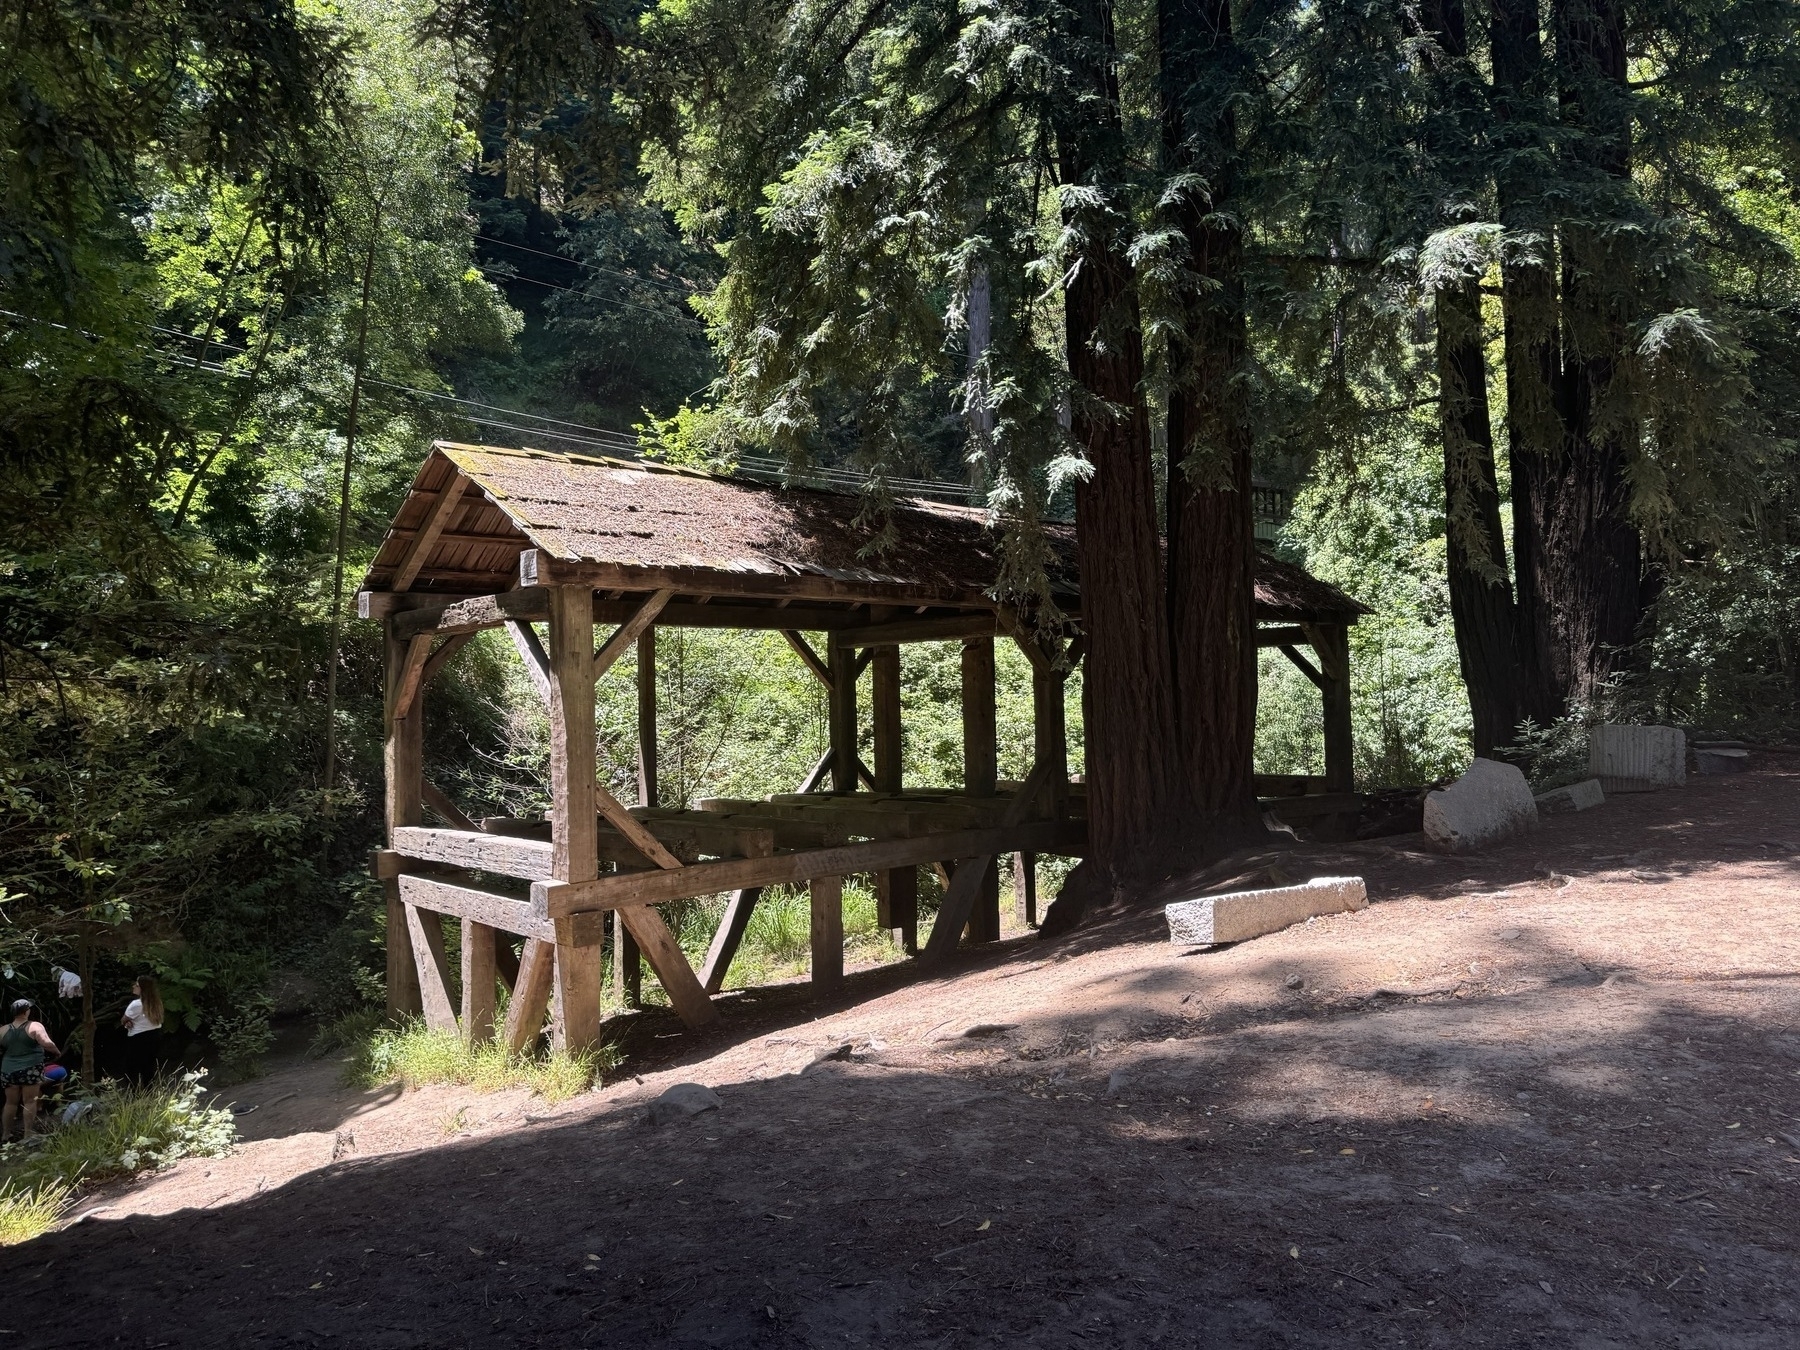 Lumber mill framework in Old Mill park in Mill Valley, CA